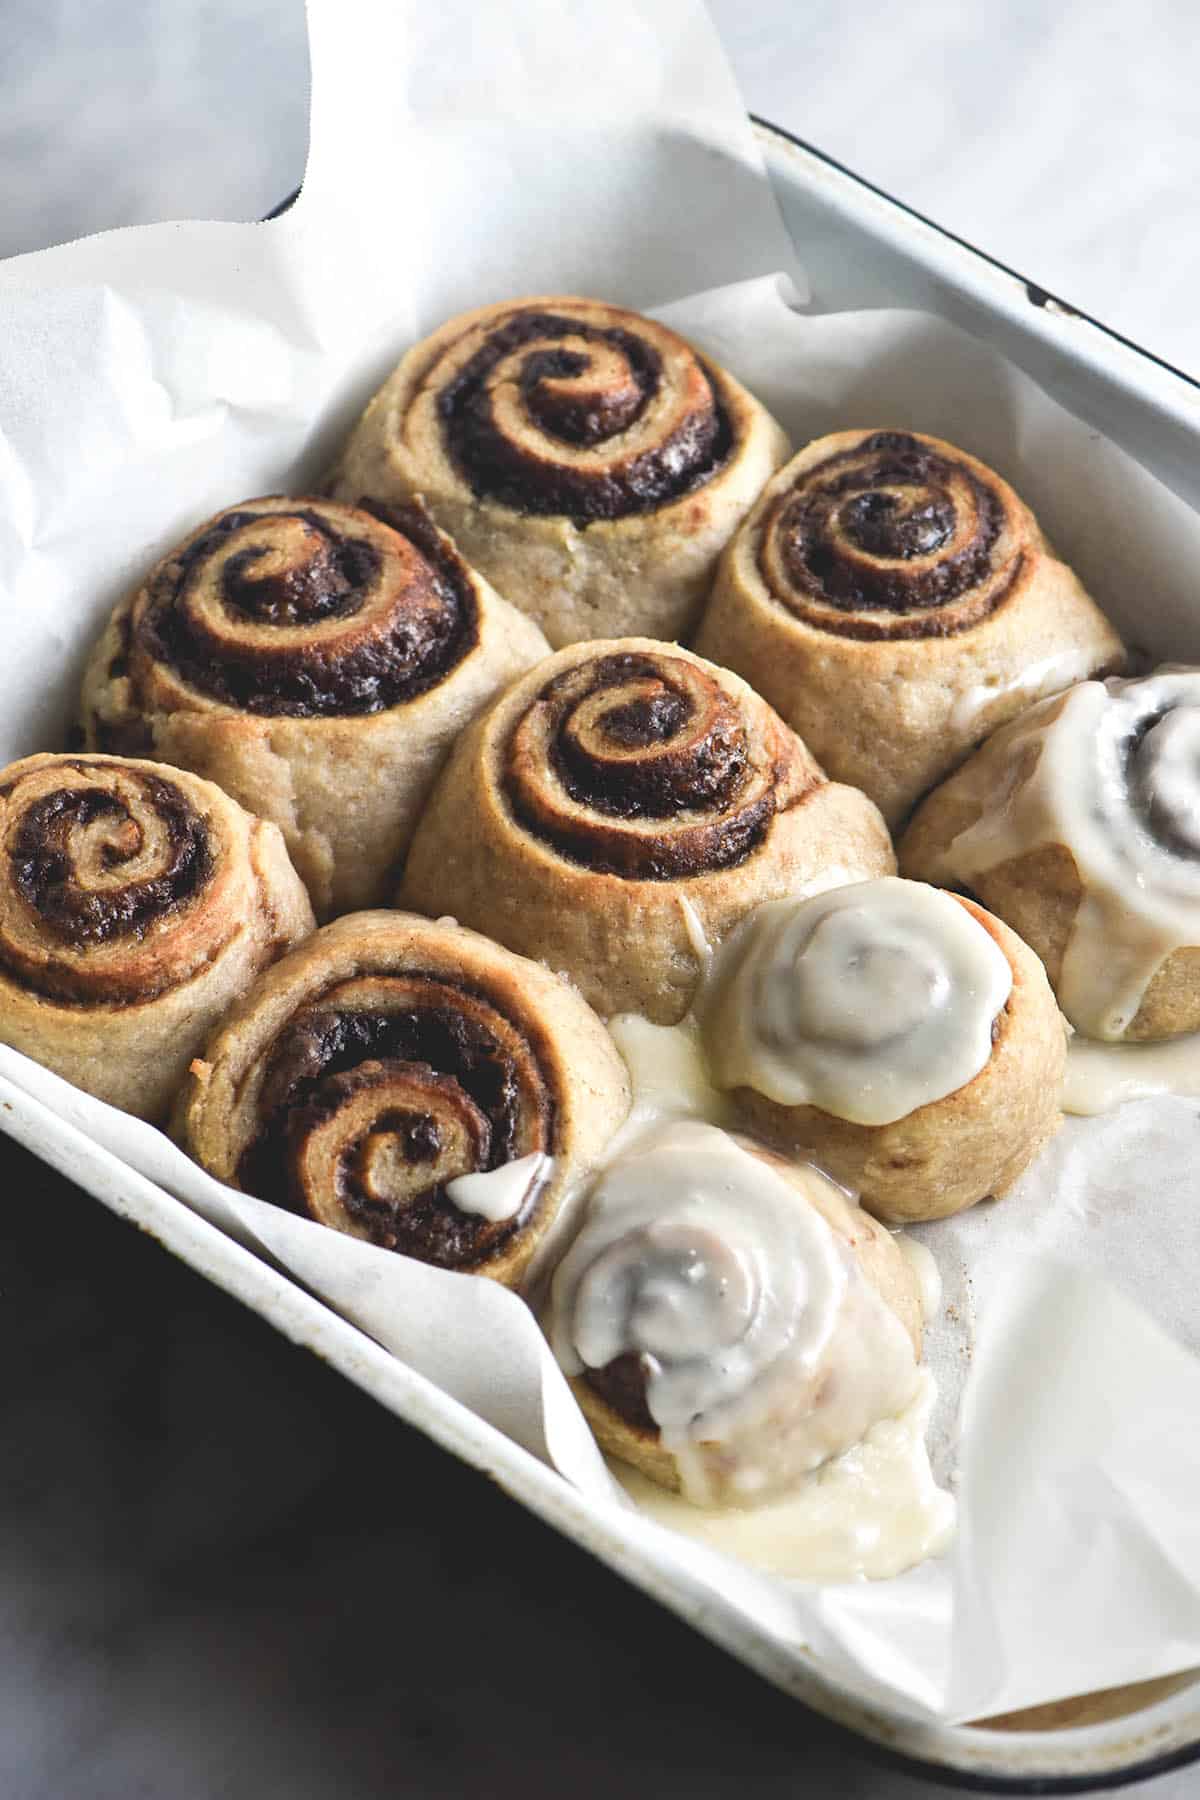 A tray of vegan, gluten free cinnamon scrolls sitting on a white marble table. The row of scrolls to the right of the image have been casually iced, while the two rolls of scrolls tp the left of the image are bare, exposing their cinnamon swirls